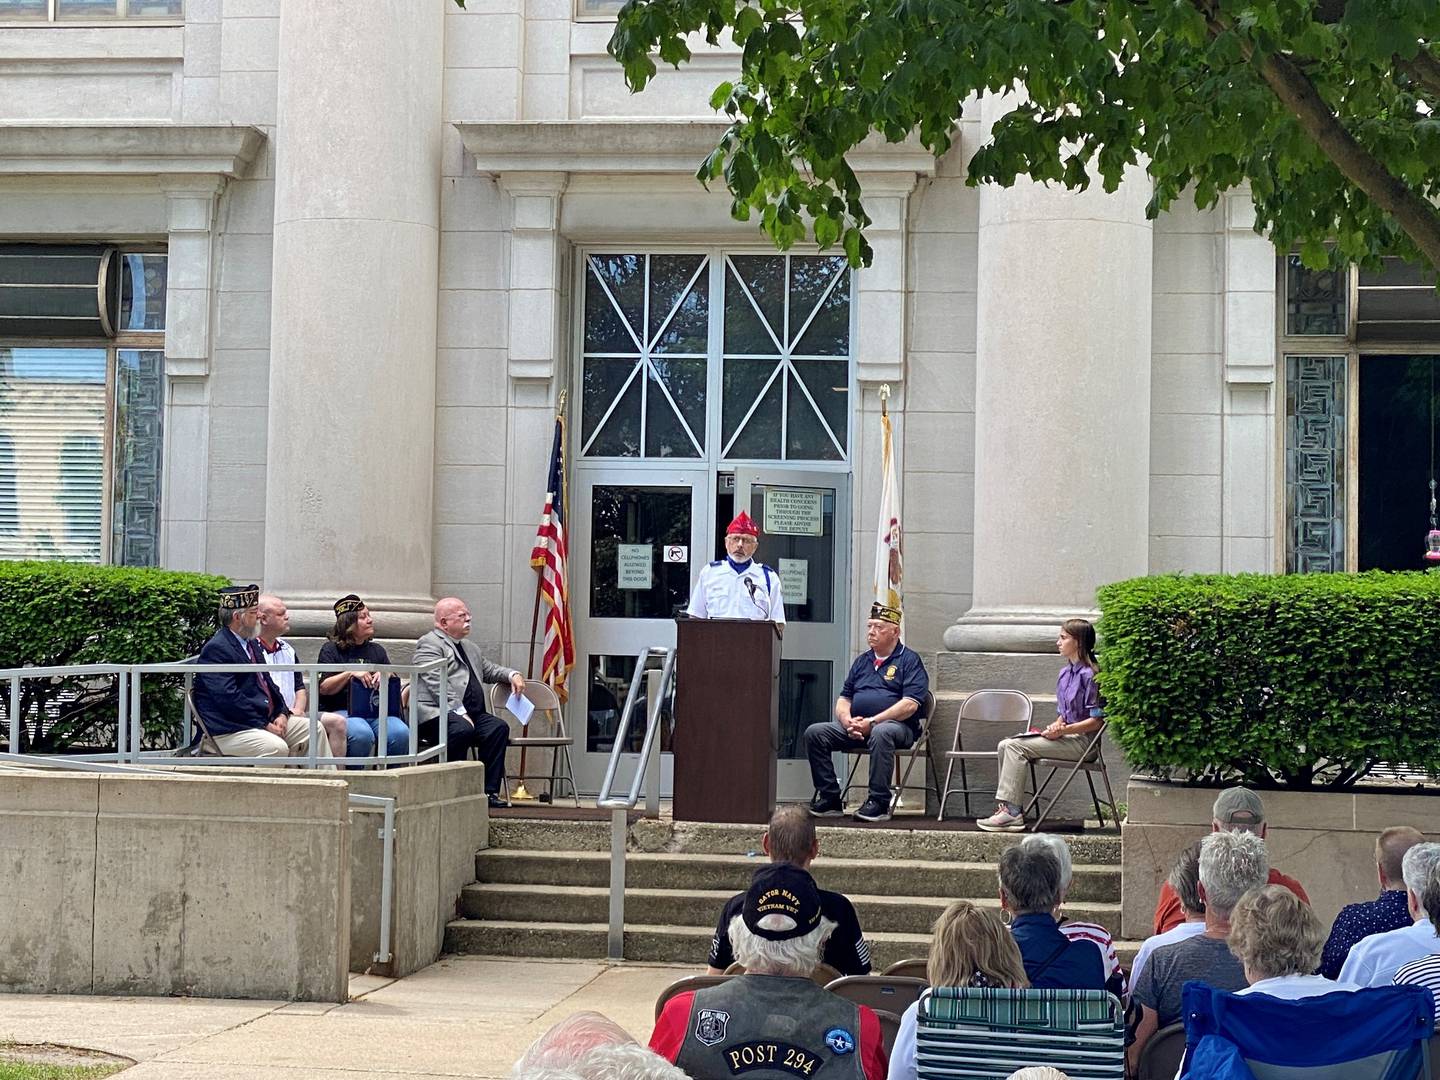 Jerry Terando addresses the crowd Monday morning at the Grundy County Courthouse.